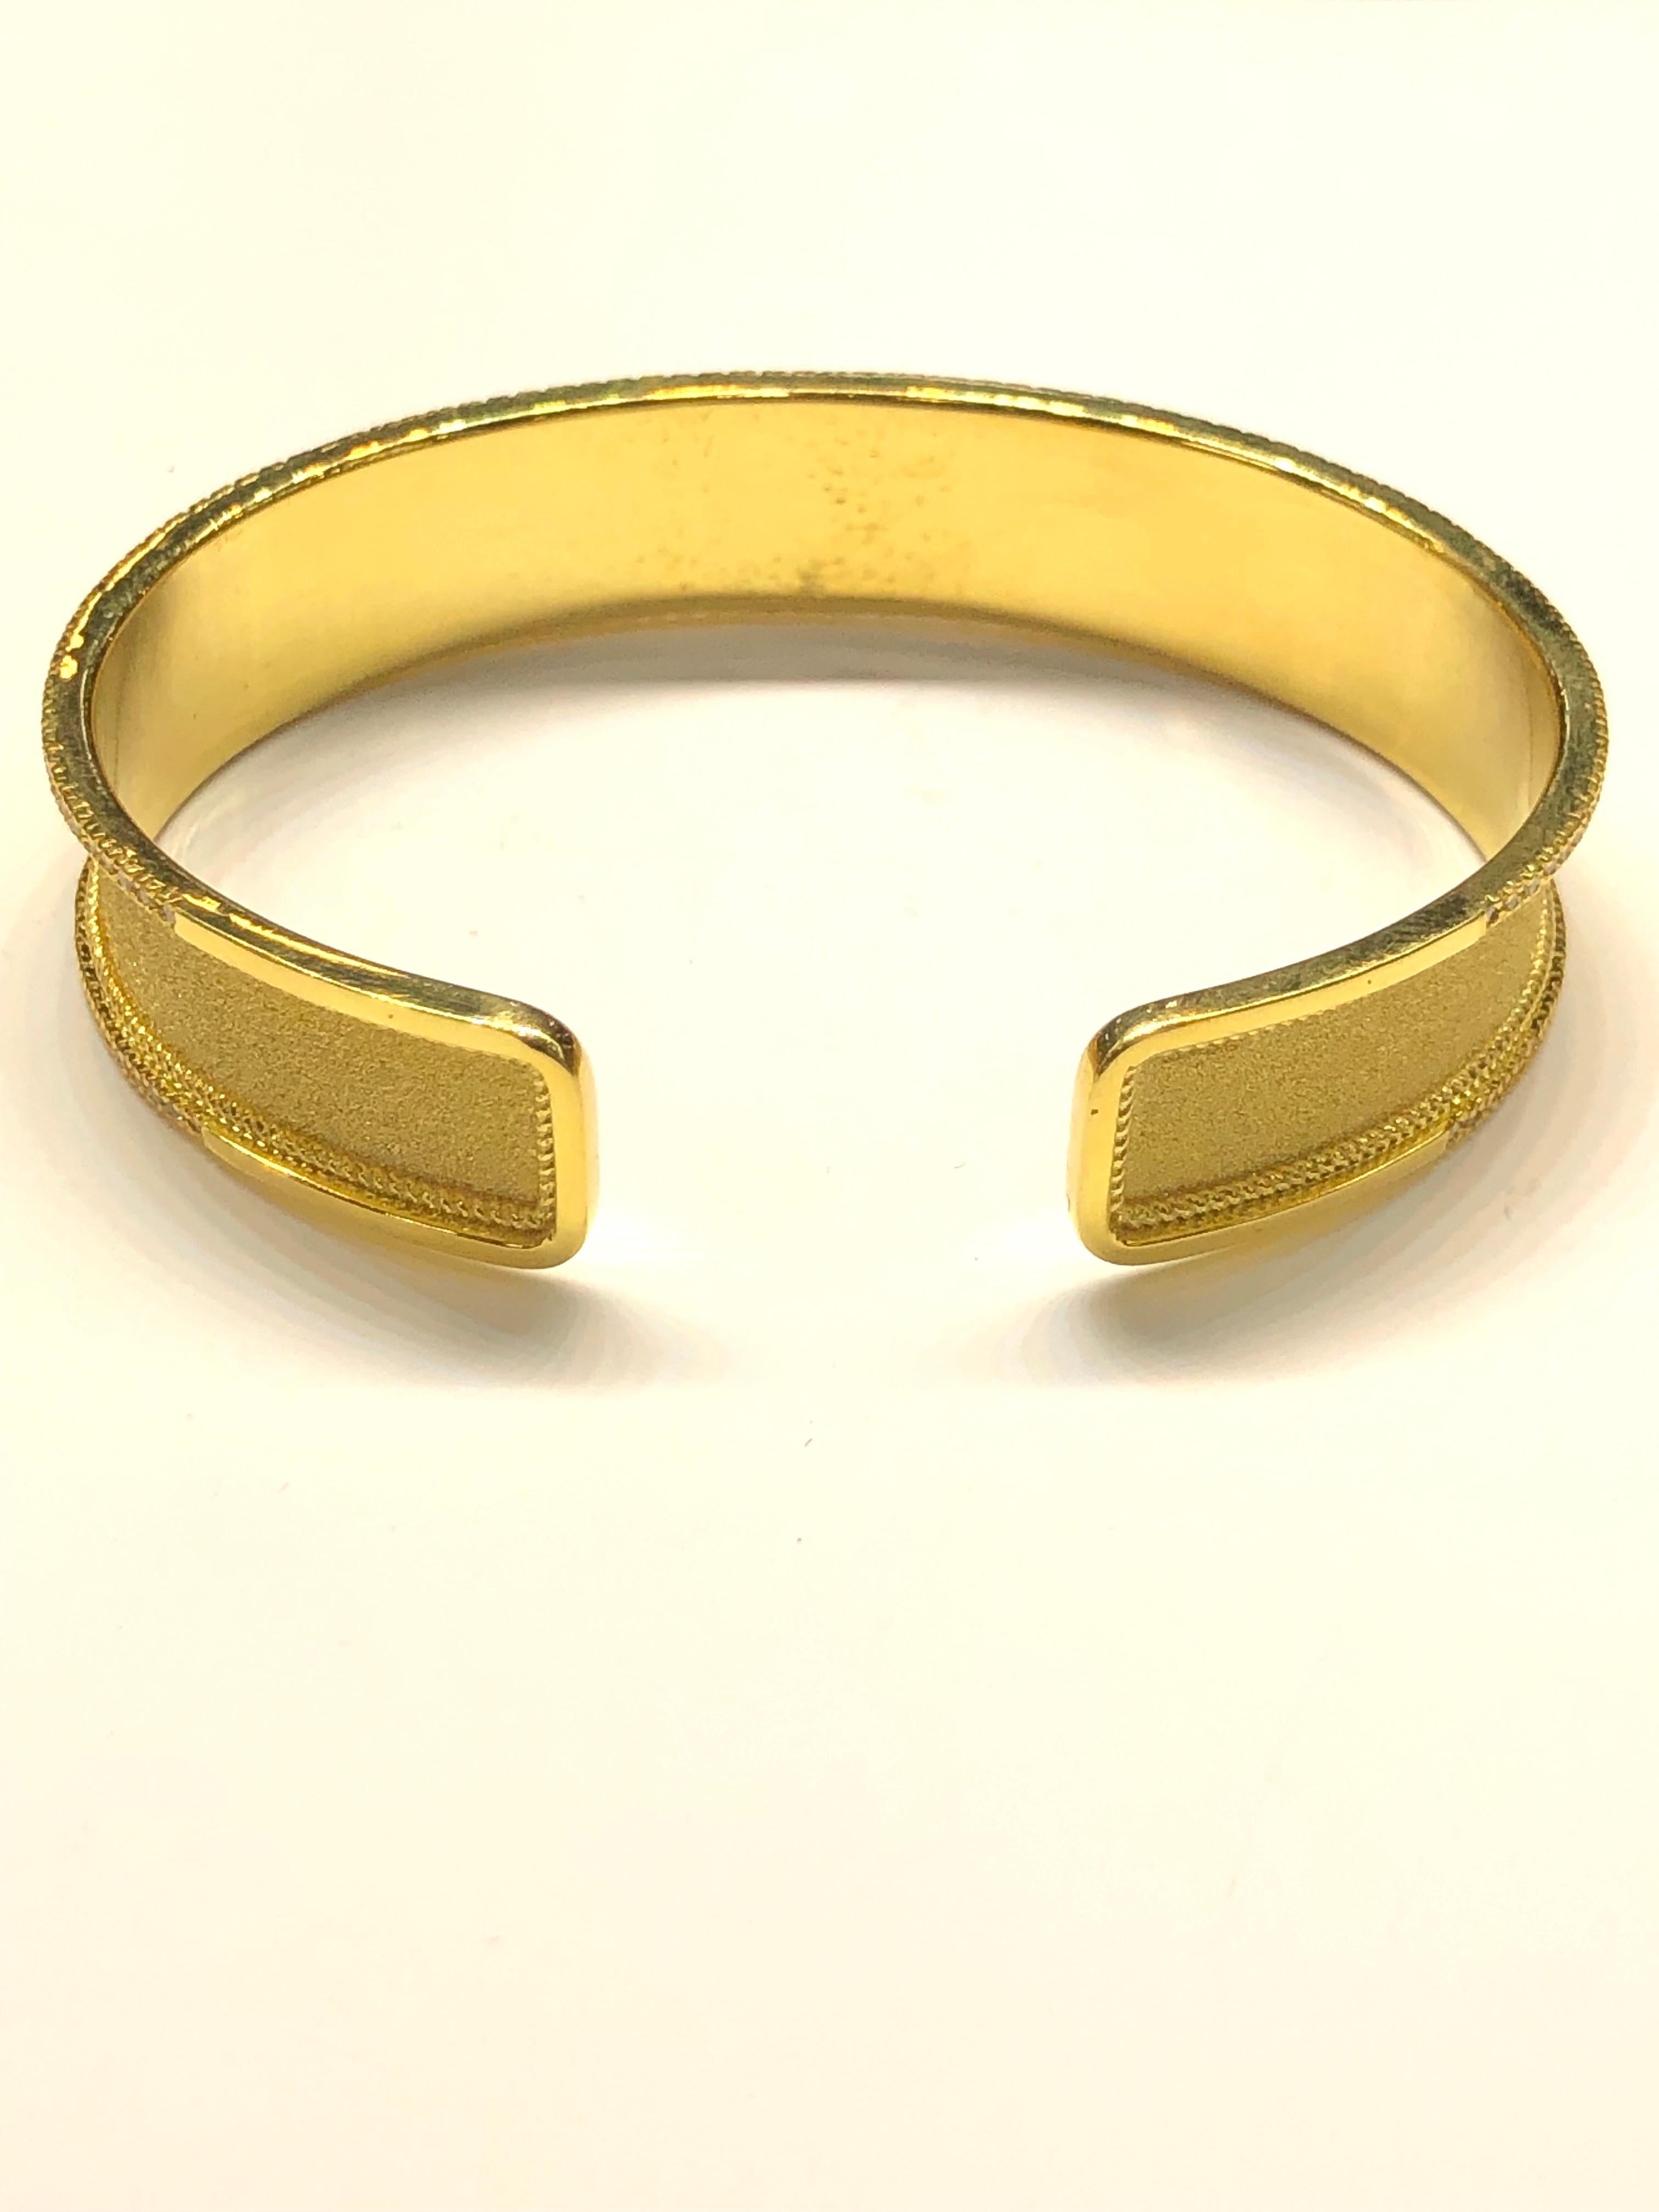 Georgios Collections 18 Karat Yellow Gold Diamond Bangle Bracelet In New Condition For Sale In Astoria, NY